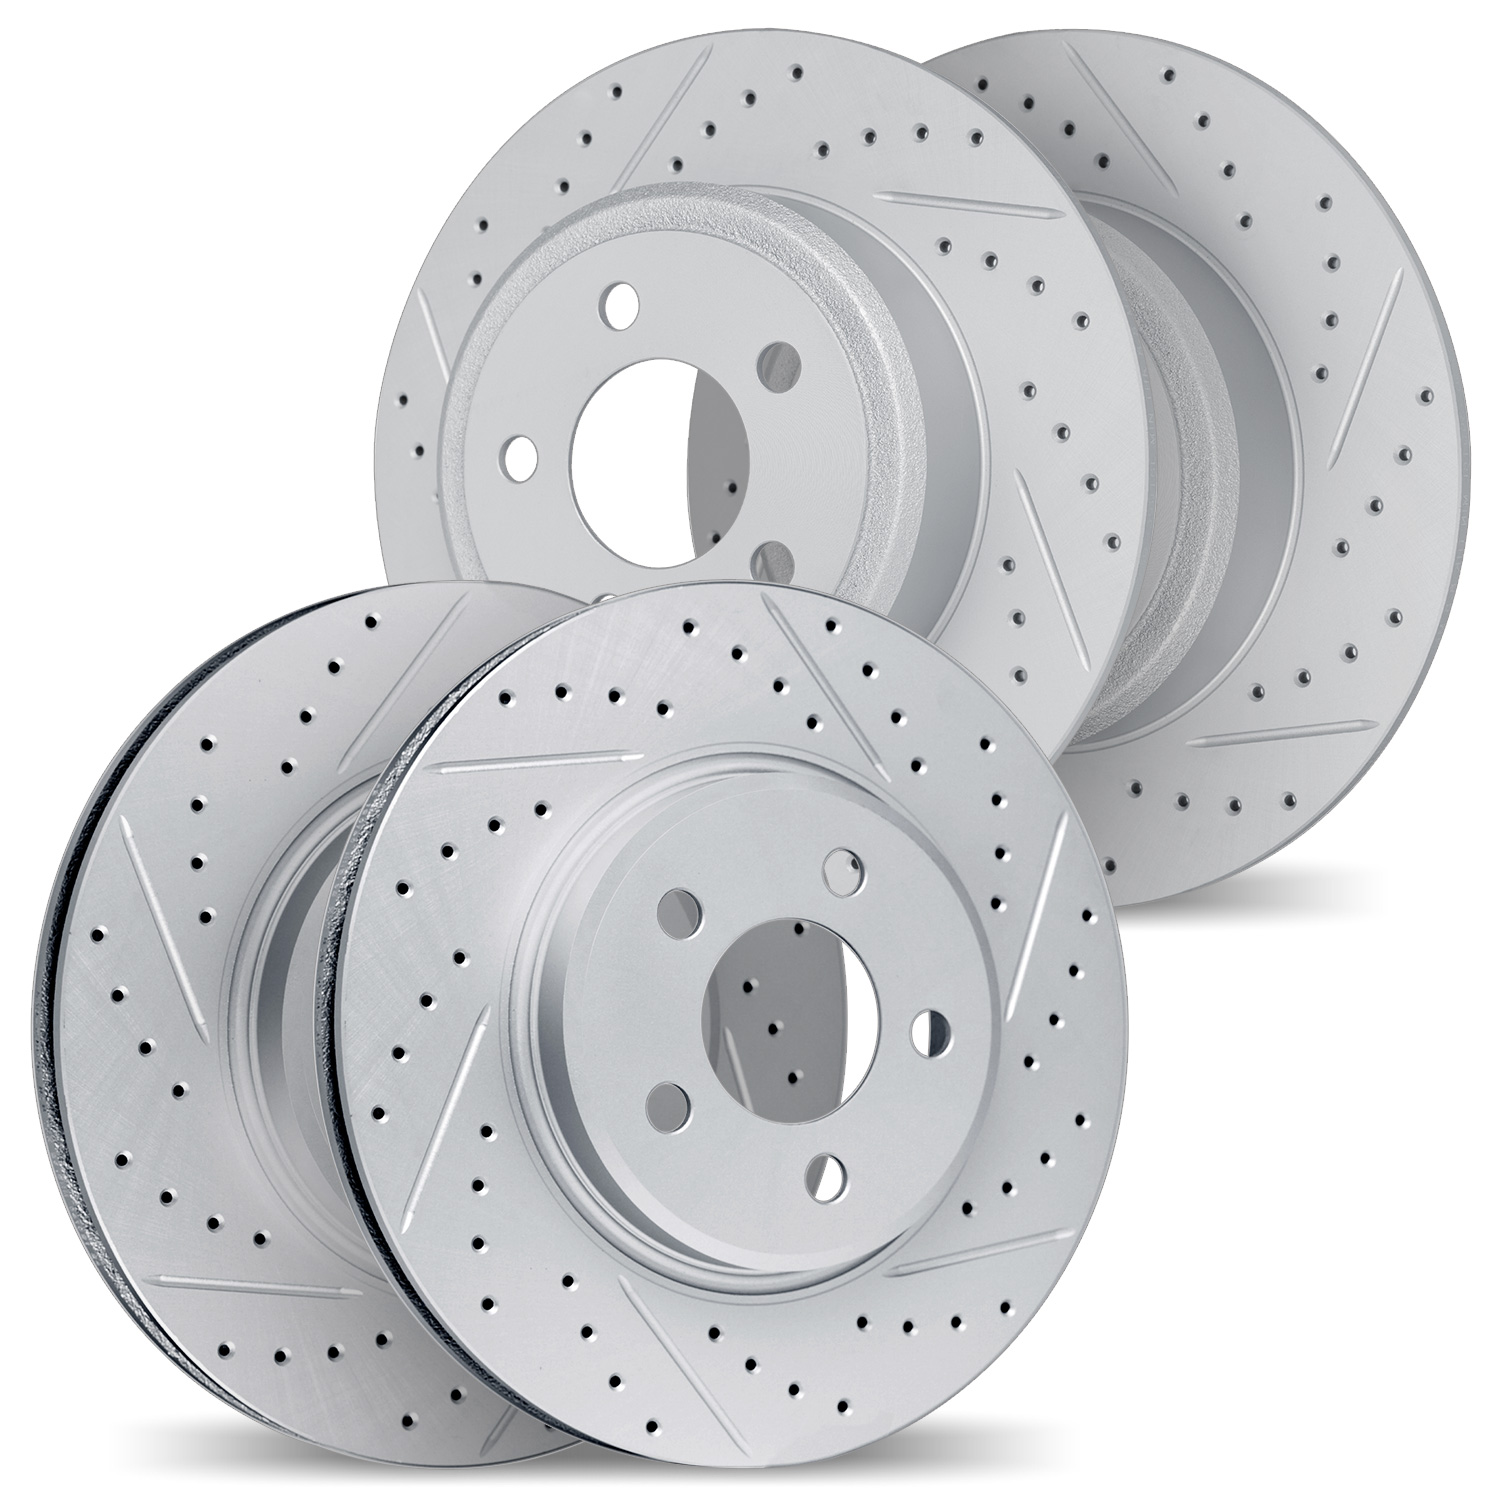 2004-76004 Geoperformance Drilled/Slotted Brake Rotors, 2002-2008 Lexus/Toyota/Scion, Position: Front and Rear